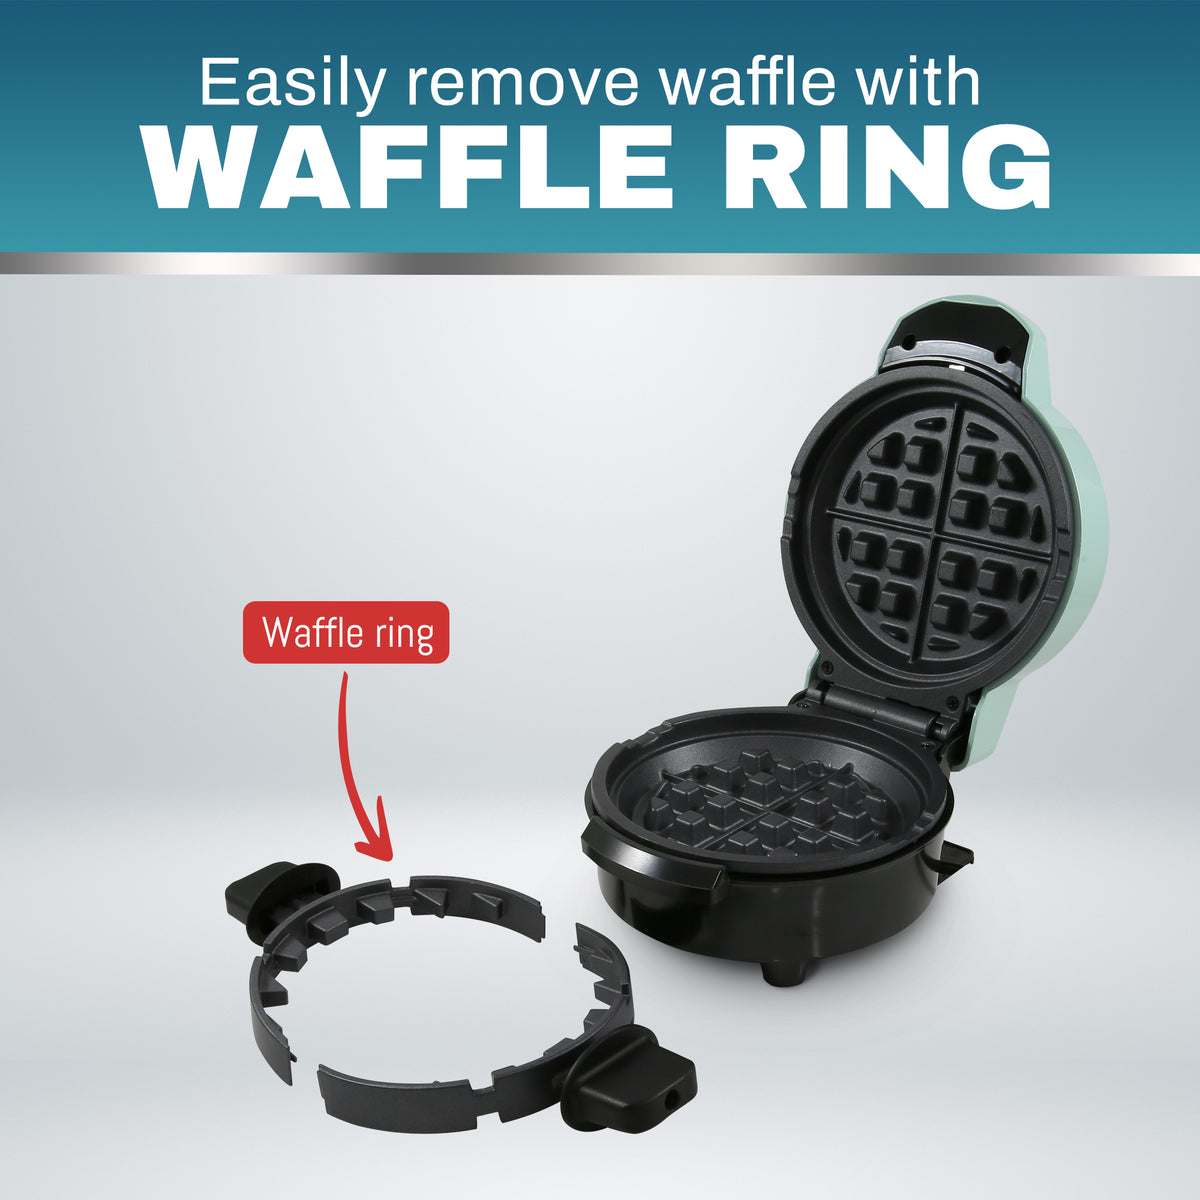  Elite Gourmet EWM013B Electric Nonstick Mini Waffle Maker with  5-inch cooking surface, Belgian Waffles, Compact Design, Hash Browns, Keto,  Snacks, Sandwich, Eggs, Easy to Clean, Black: Home & Kitchen